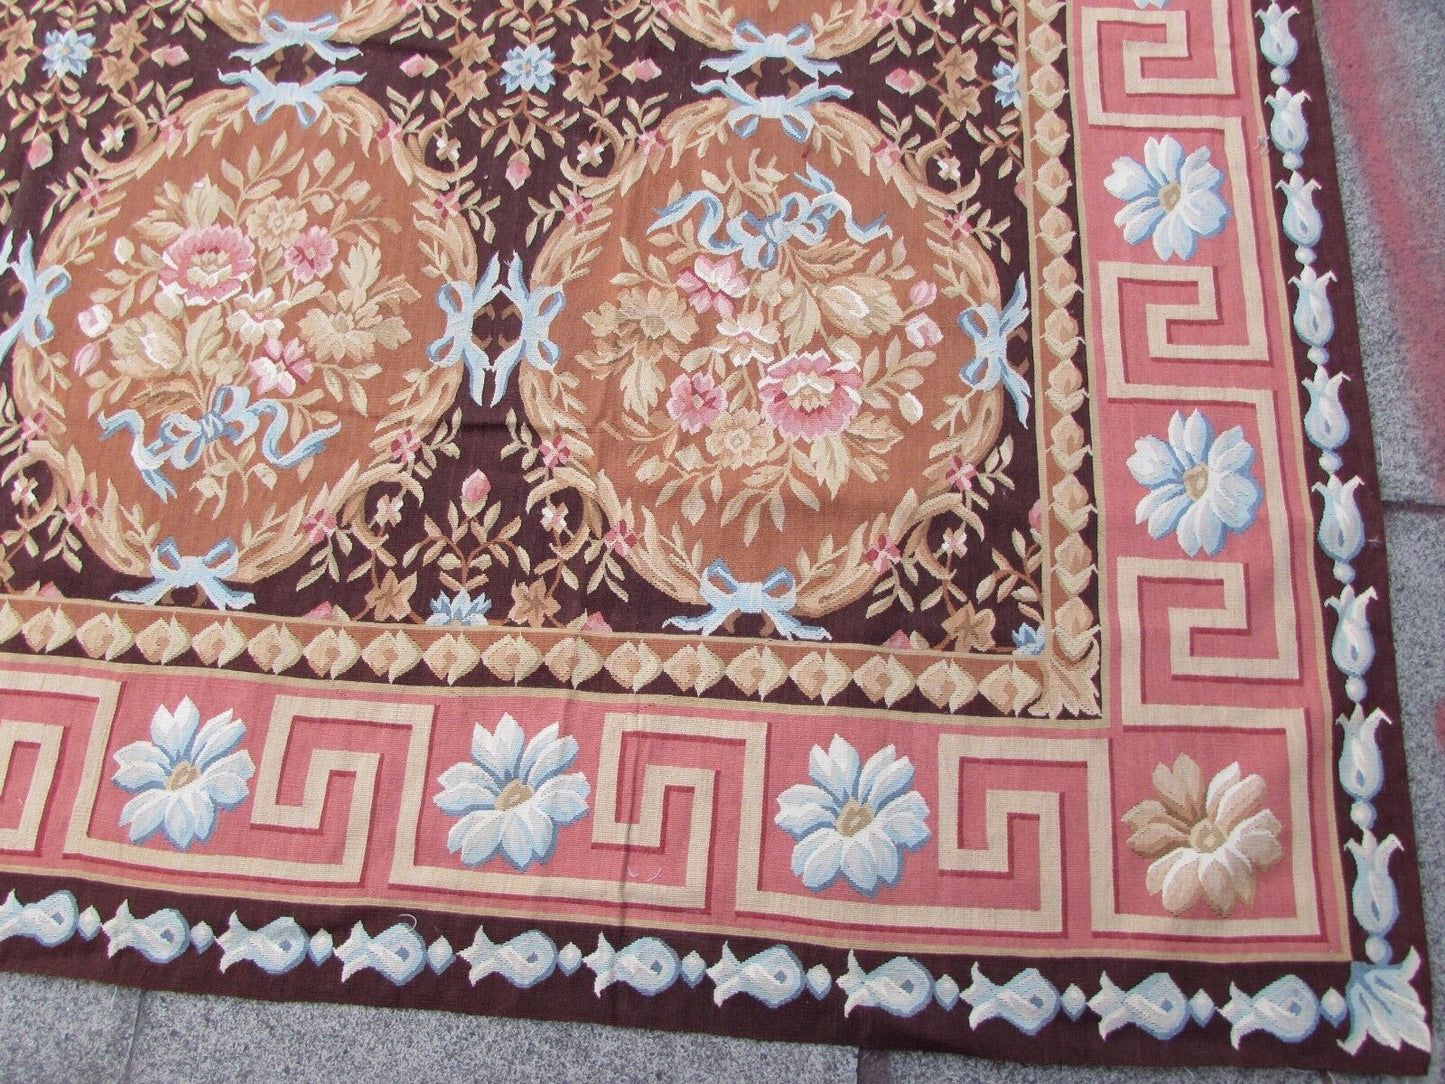 Handmade vintage French Aubusson rug in traditional design and burgundy shades. The rug is from the end of 20th century in original good condition.